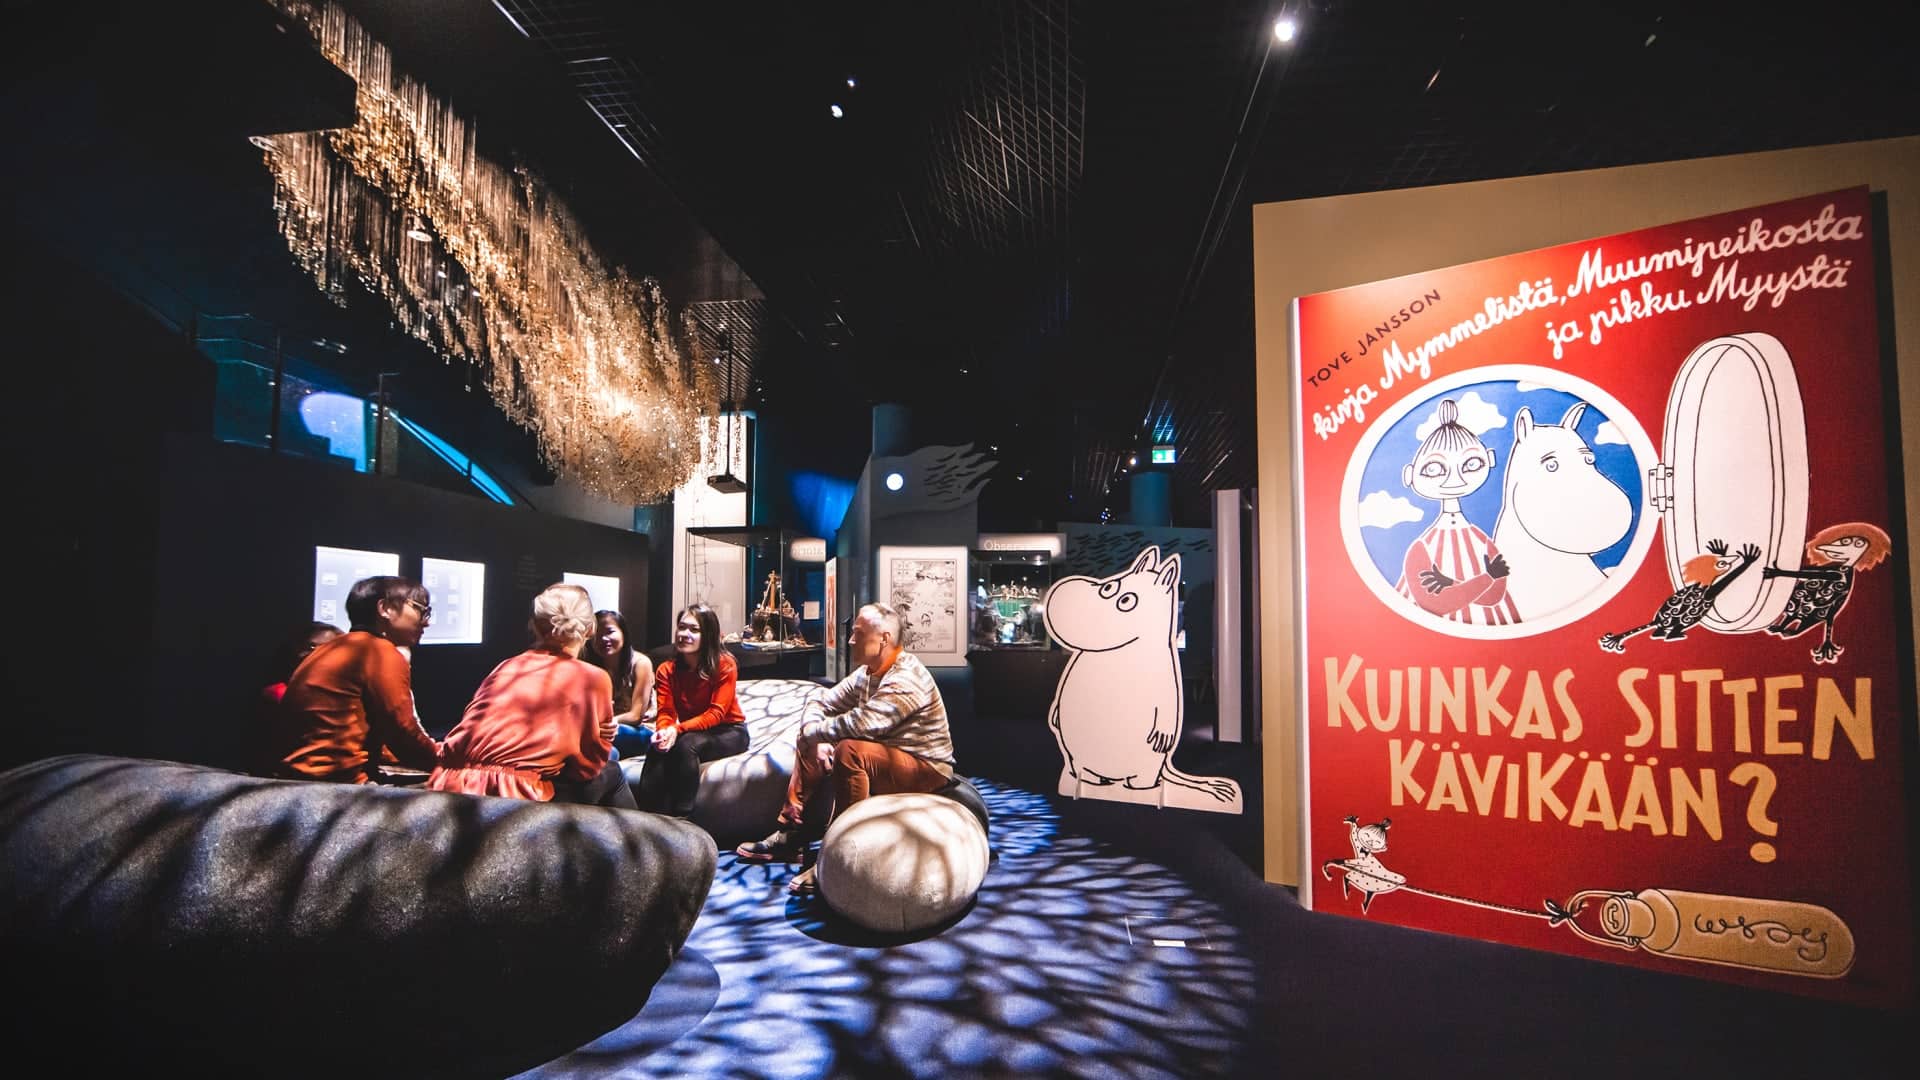 Customers are sitting on a Moomin Museum in Tampere